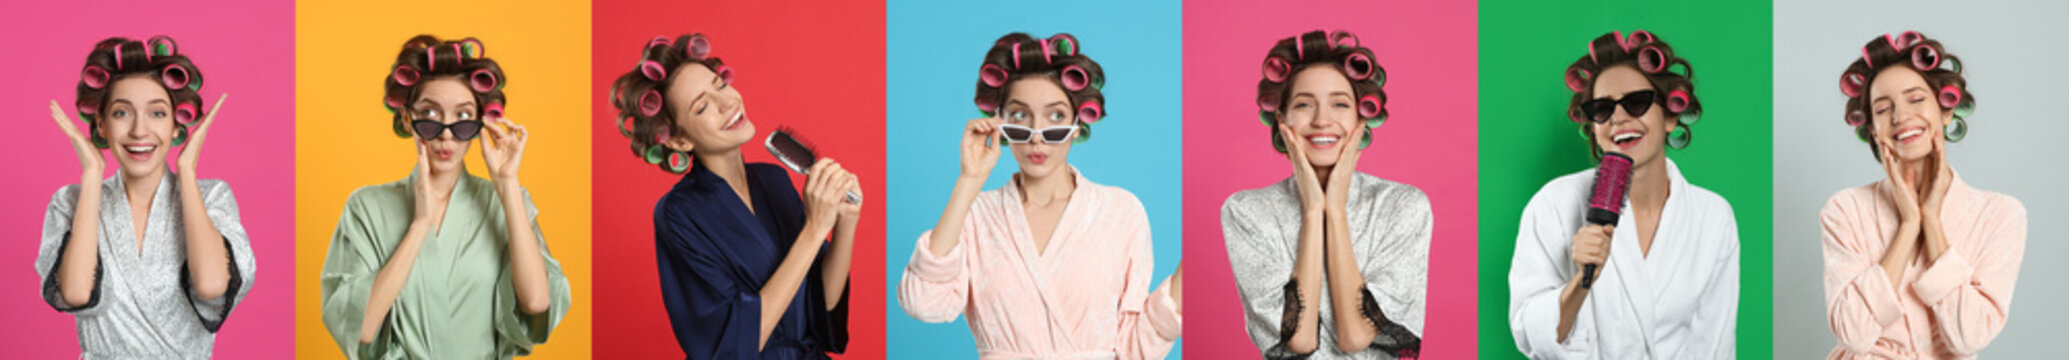 Collage with photos of beautiful young woman wearing bathrobe with hair curlers on different color backgrounds. Banner design